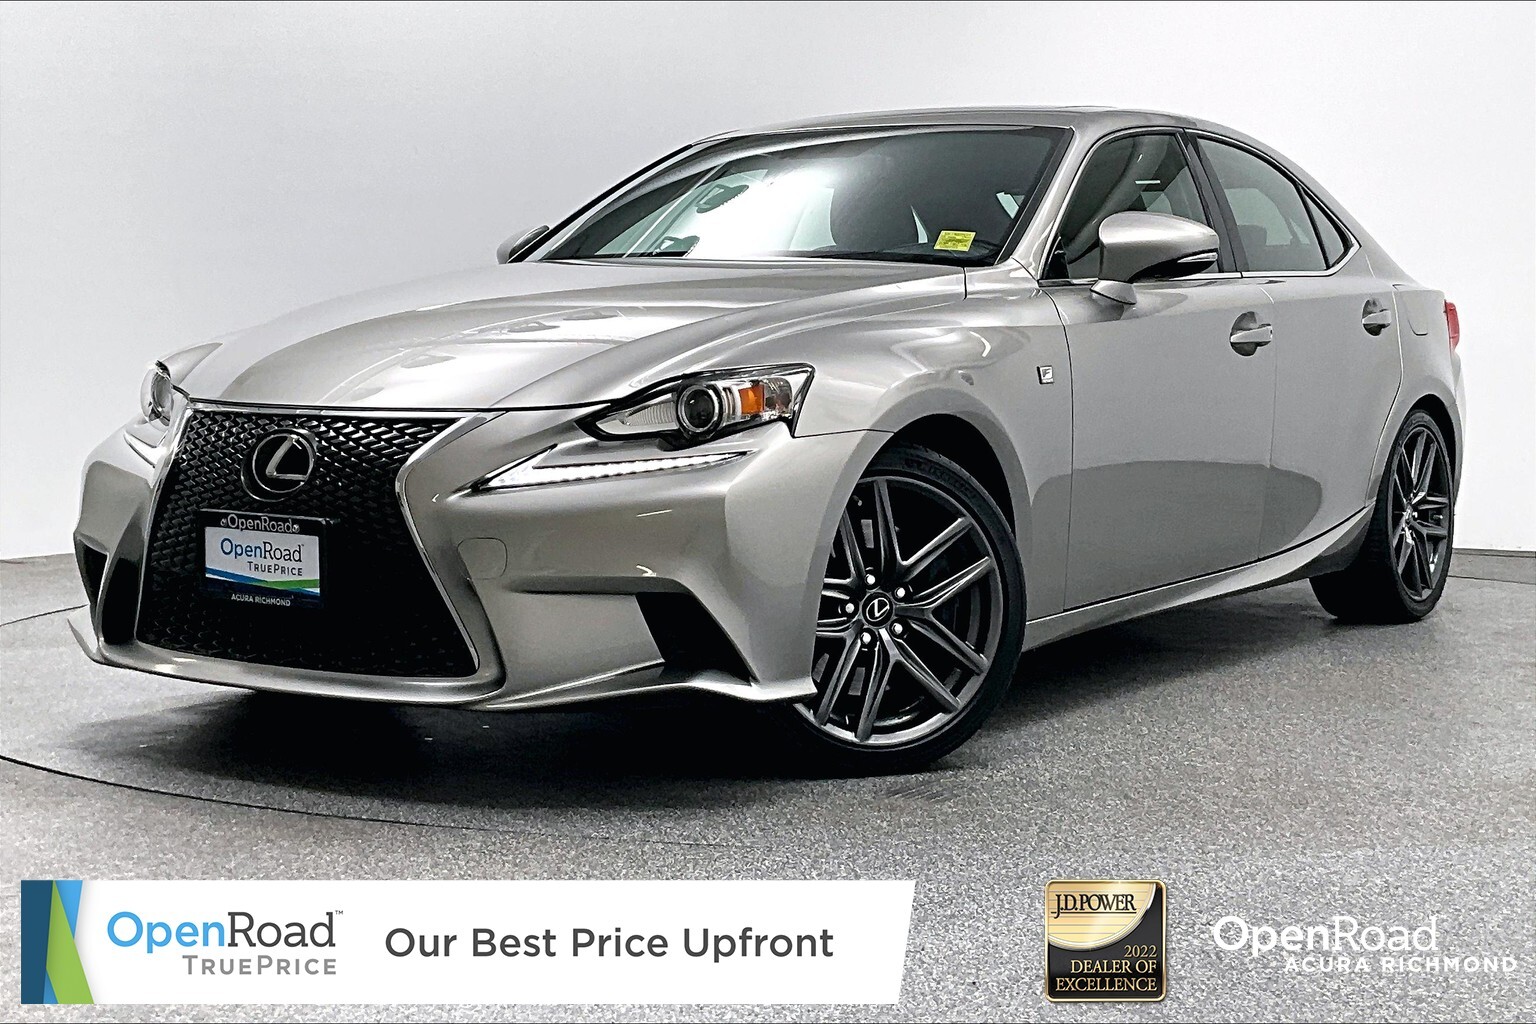 2016 Lexus IS 300 AWD AWD | Low Mileage | New Tires | Local Vehicle